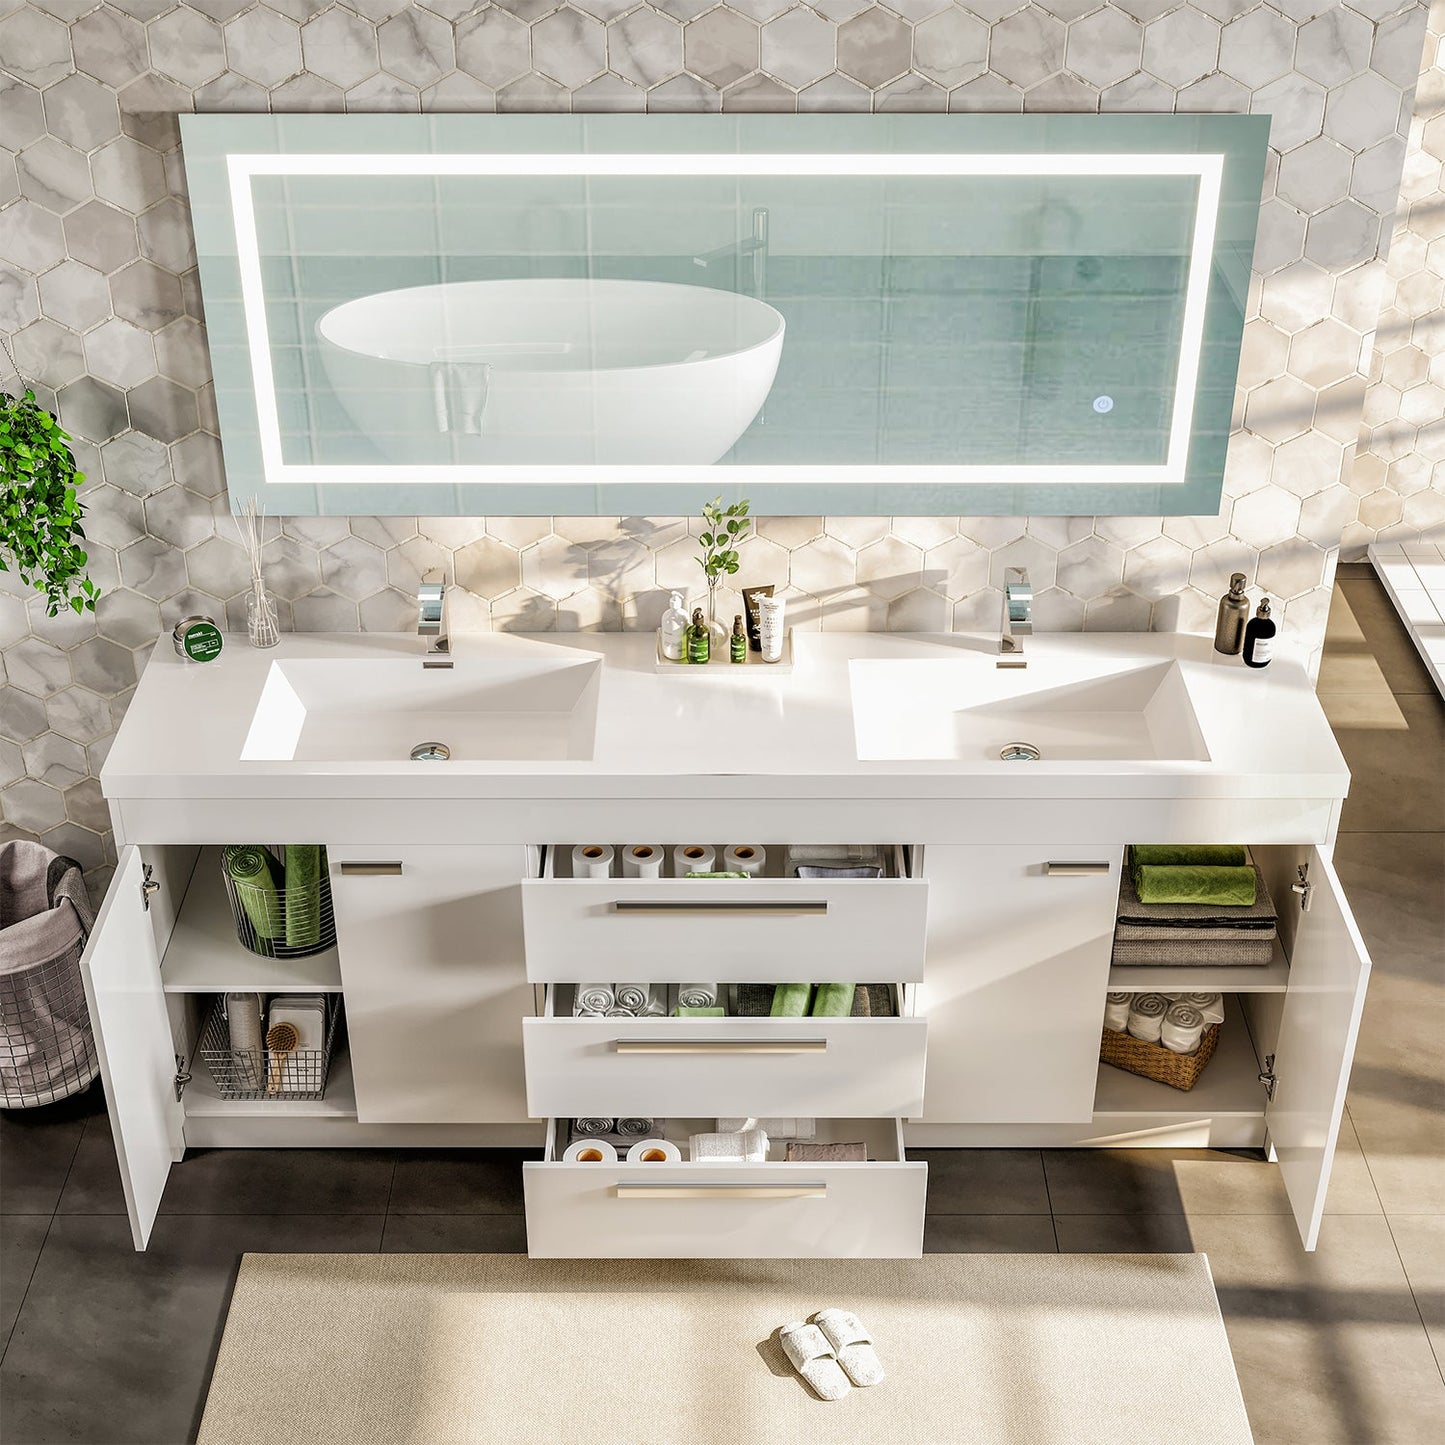 Lugano 84"W x 20" D White Double Sink Bathroom Vanity with Acrylic Countertop and Integrated Sink